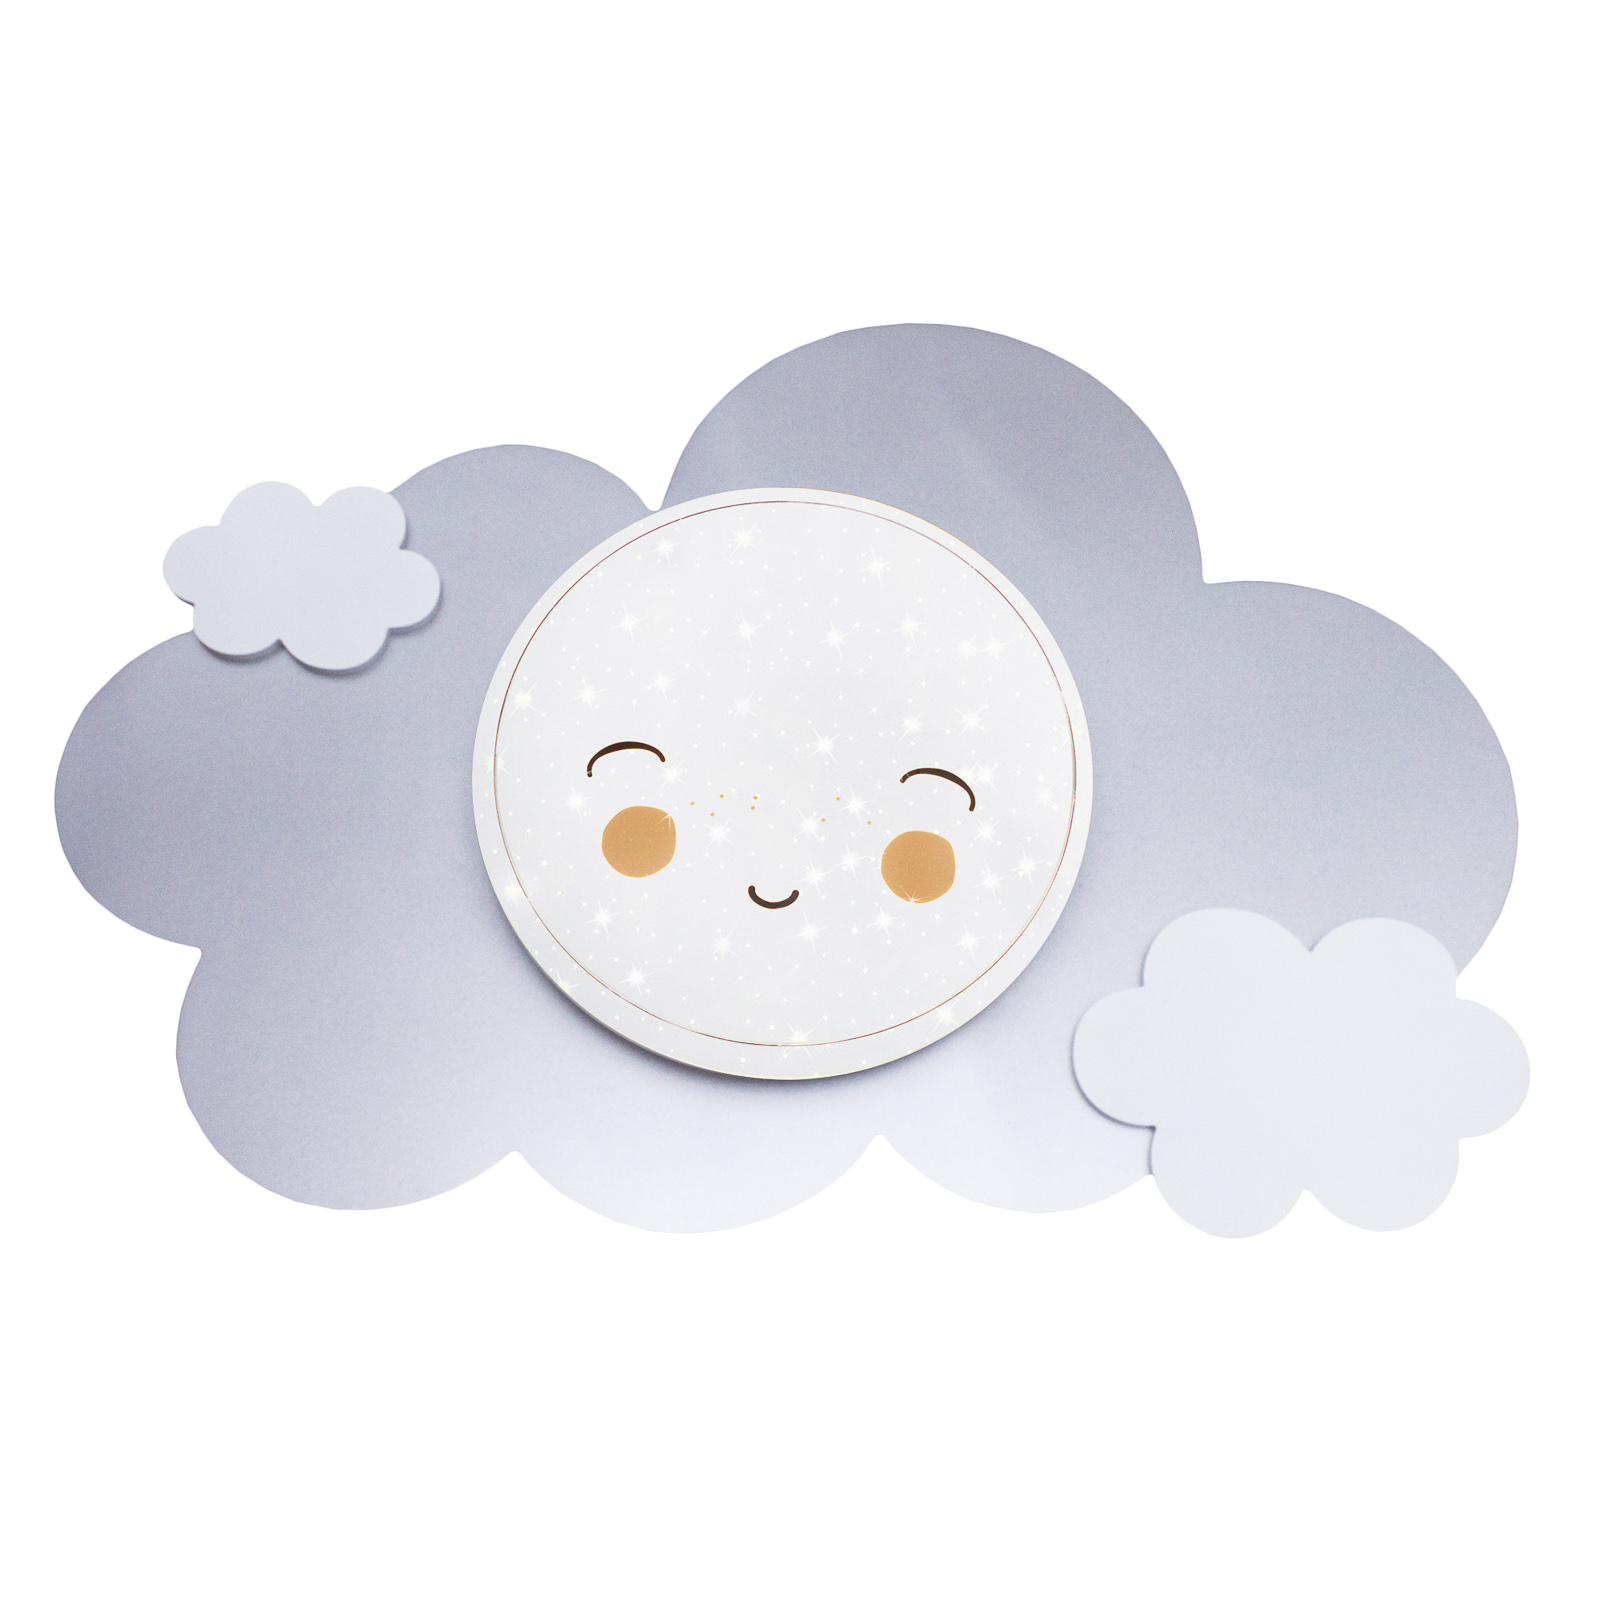 Starlight Smile LED wall light, cloud, silver